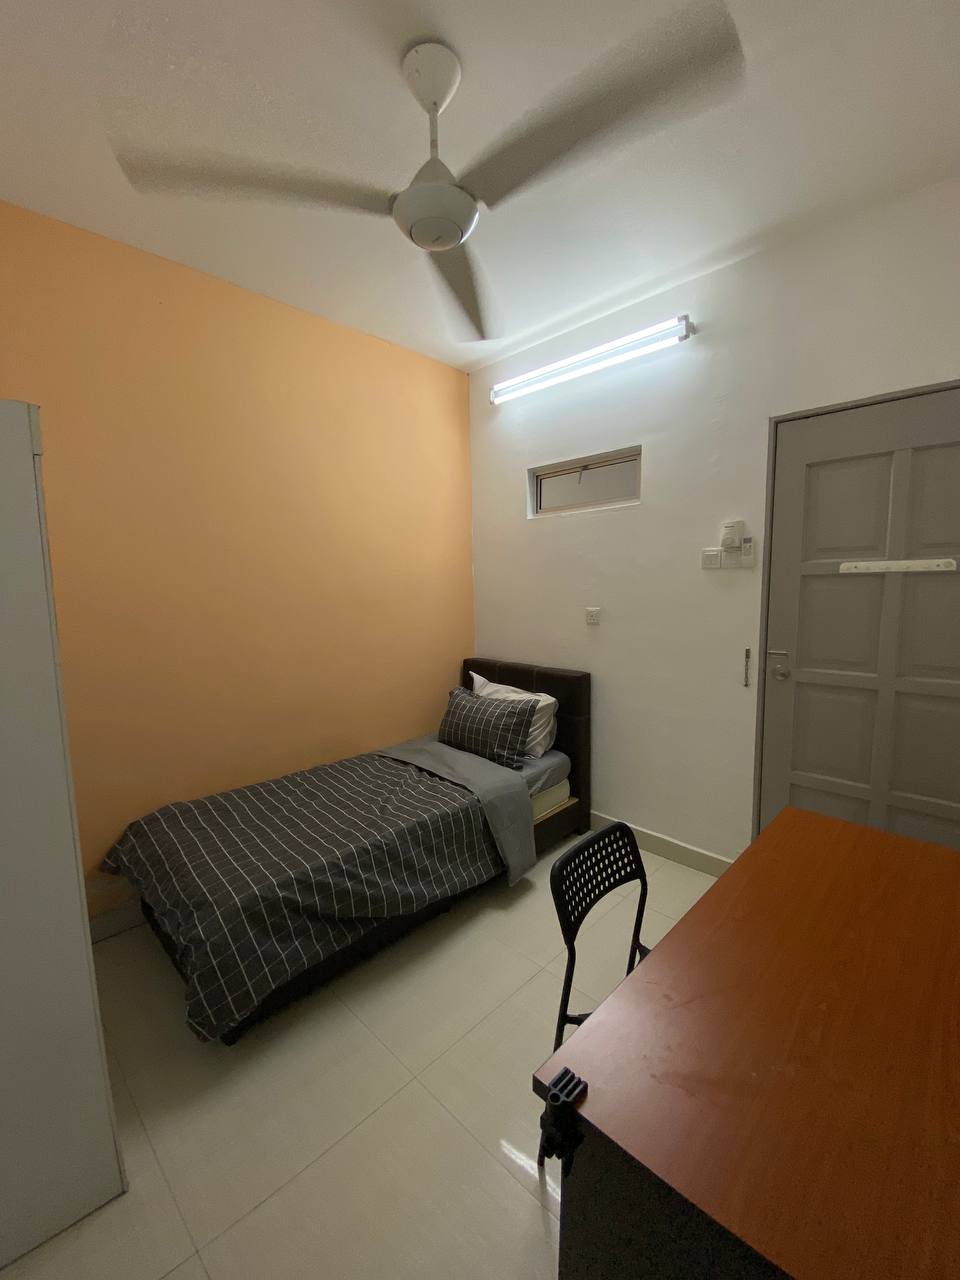 🧹Free Cleaning Service Single Room near 📍Taylors College for rent!